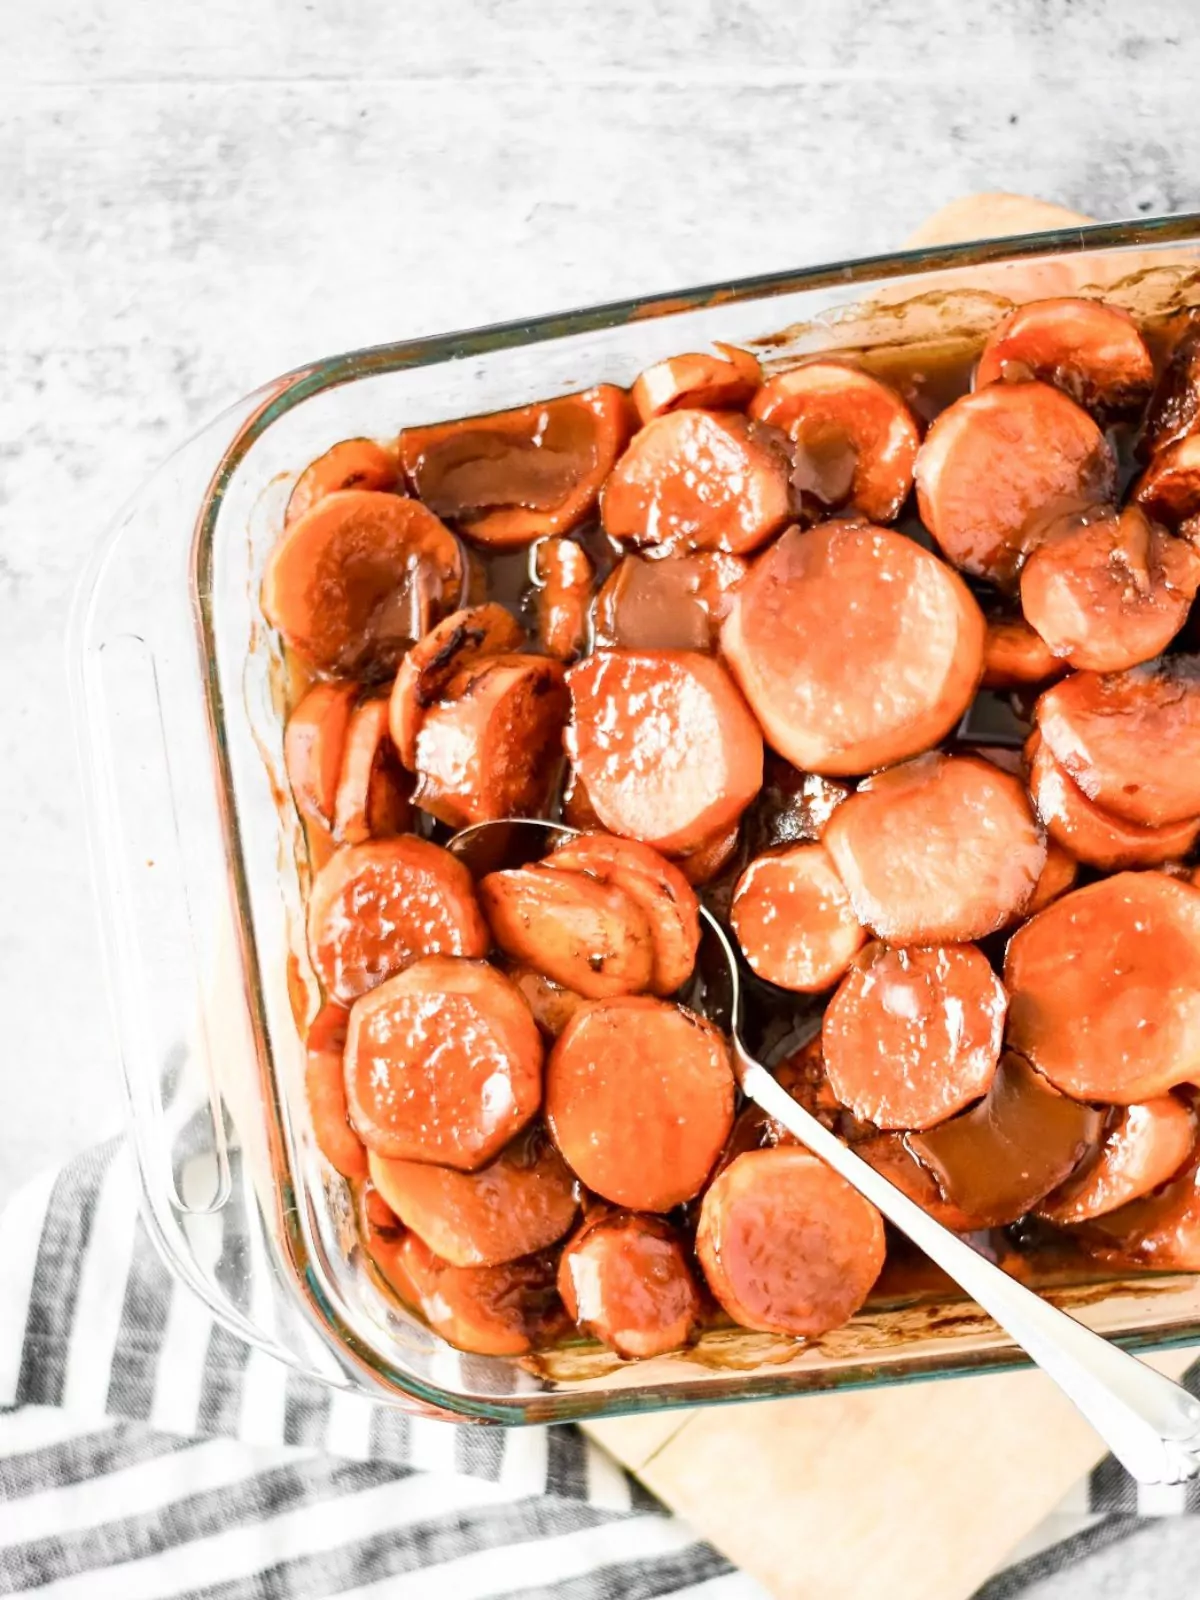 baked candied yams recipe.